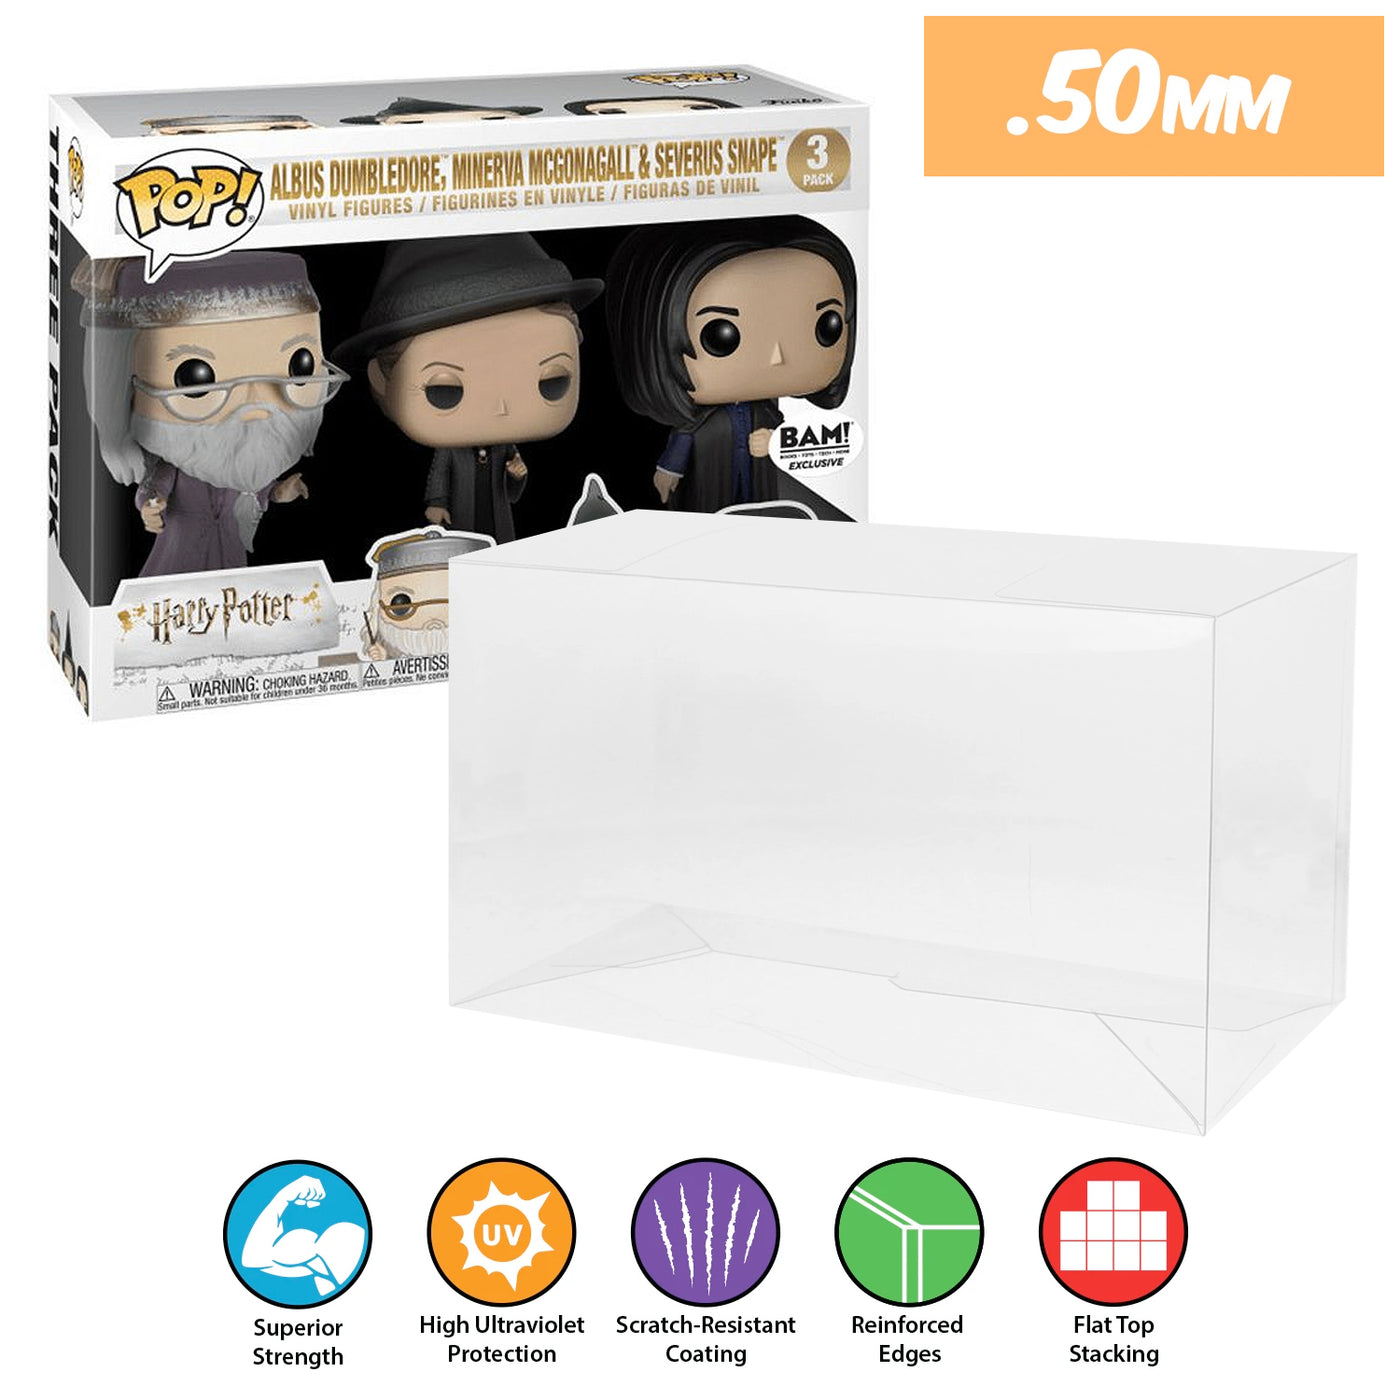 harry potter bam 3 pack best funko pop protectors thick strong uv scratch flat top stack vinyl display geek plastic shield vaulted eco armor fits collect protect display case kollector protector